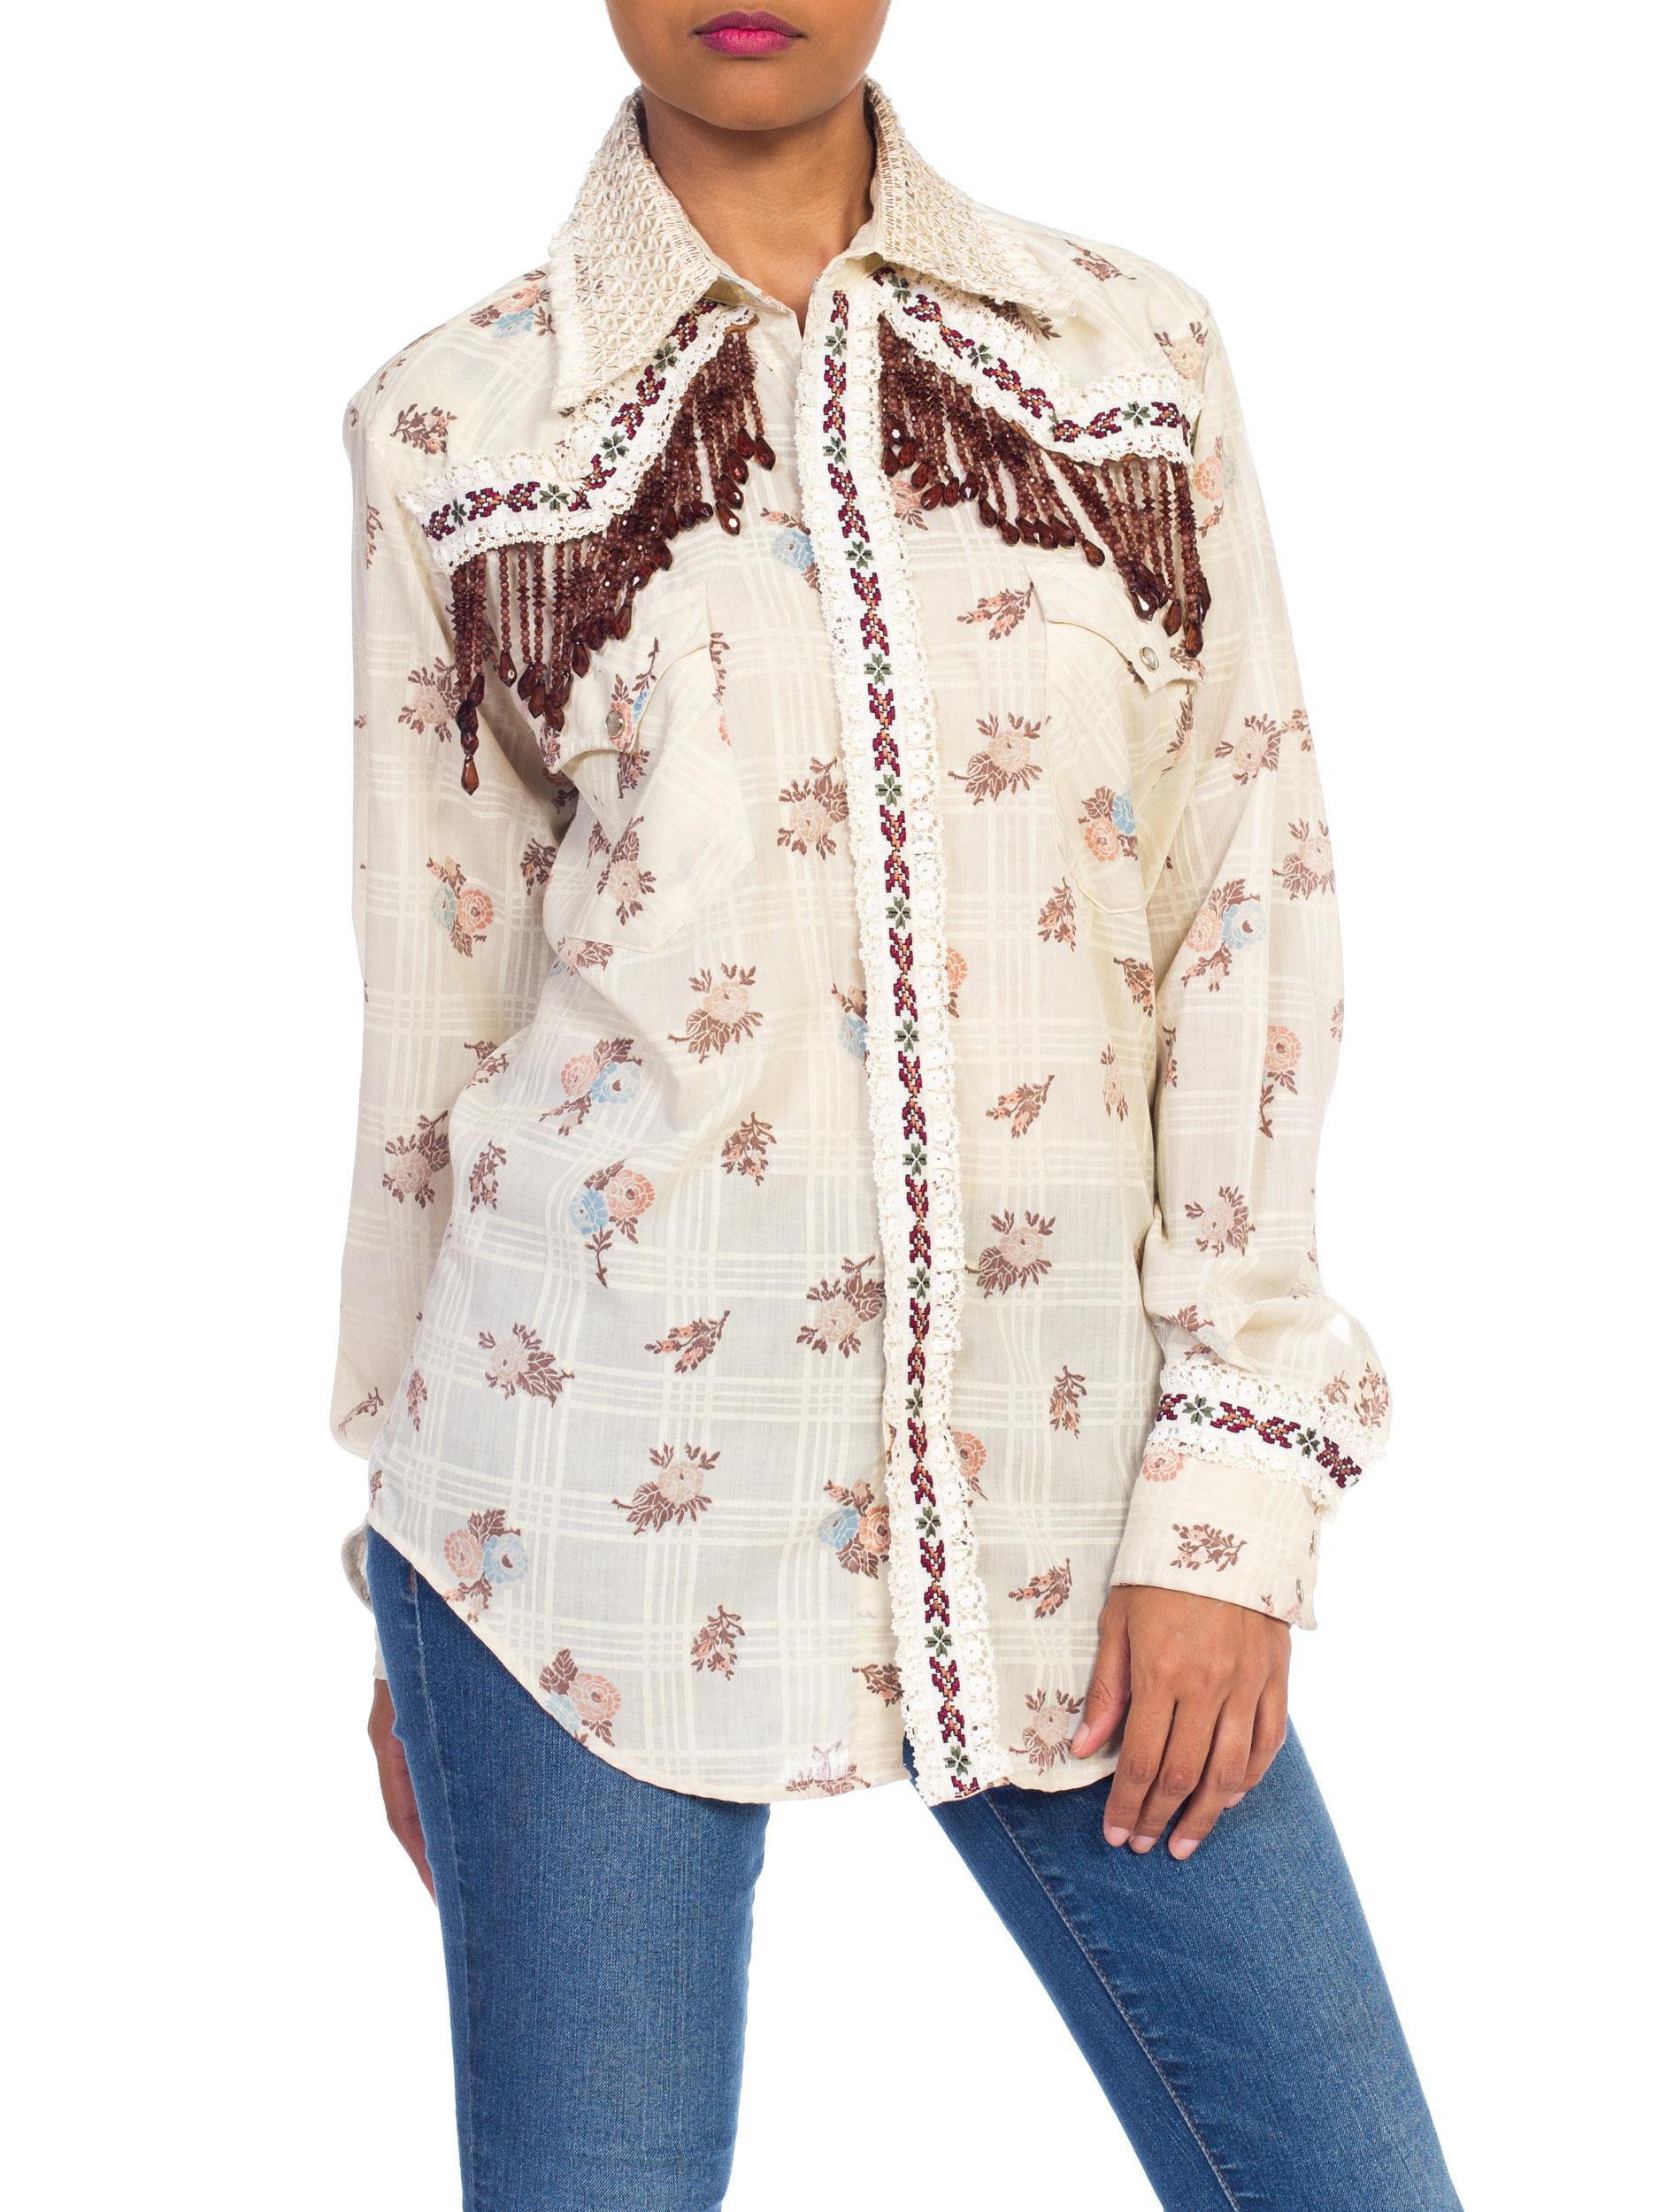 1970s Wrangler Floral Print Western Top With Lace and Ribbon 1